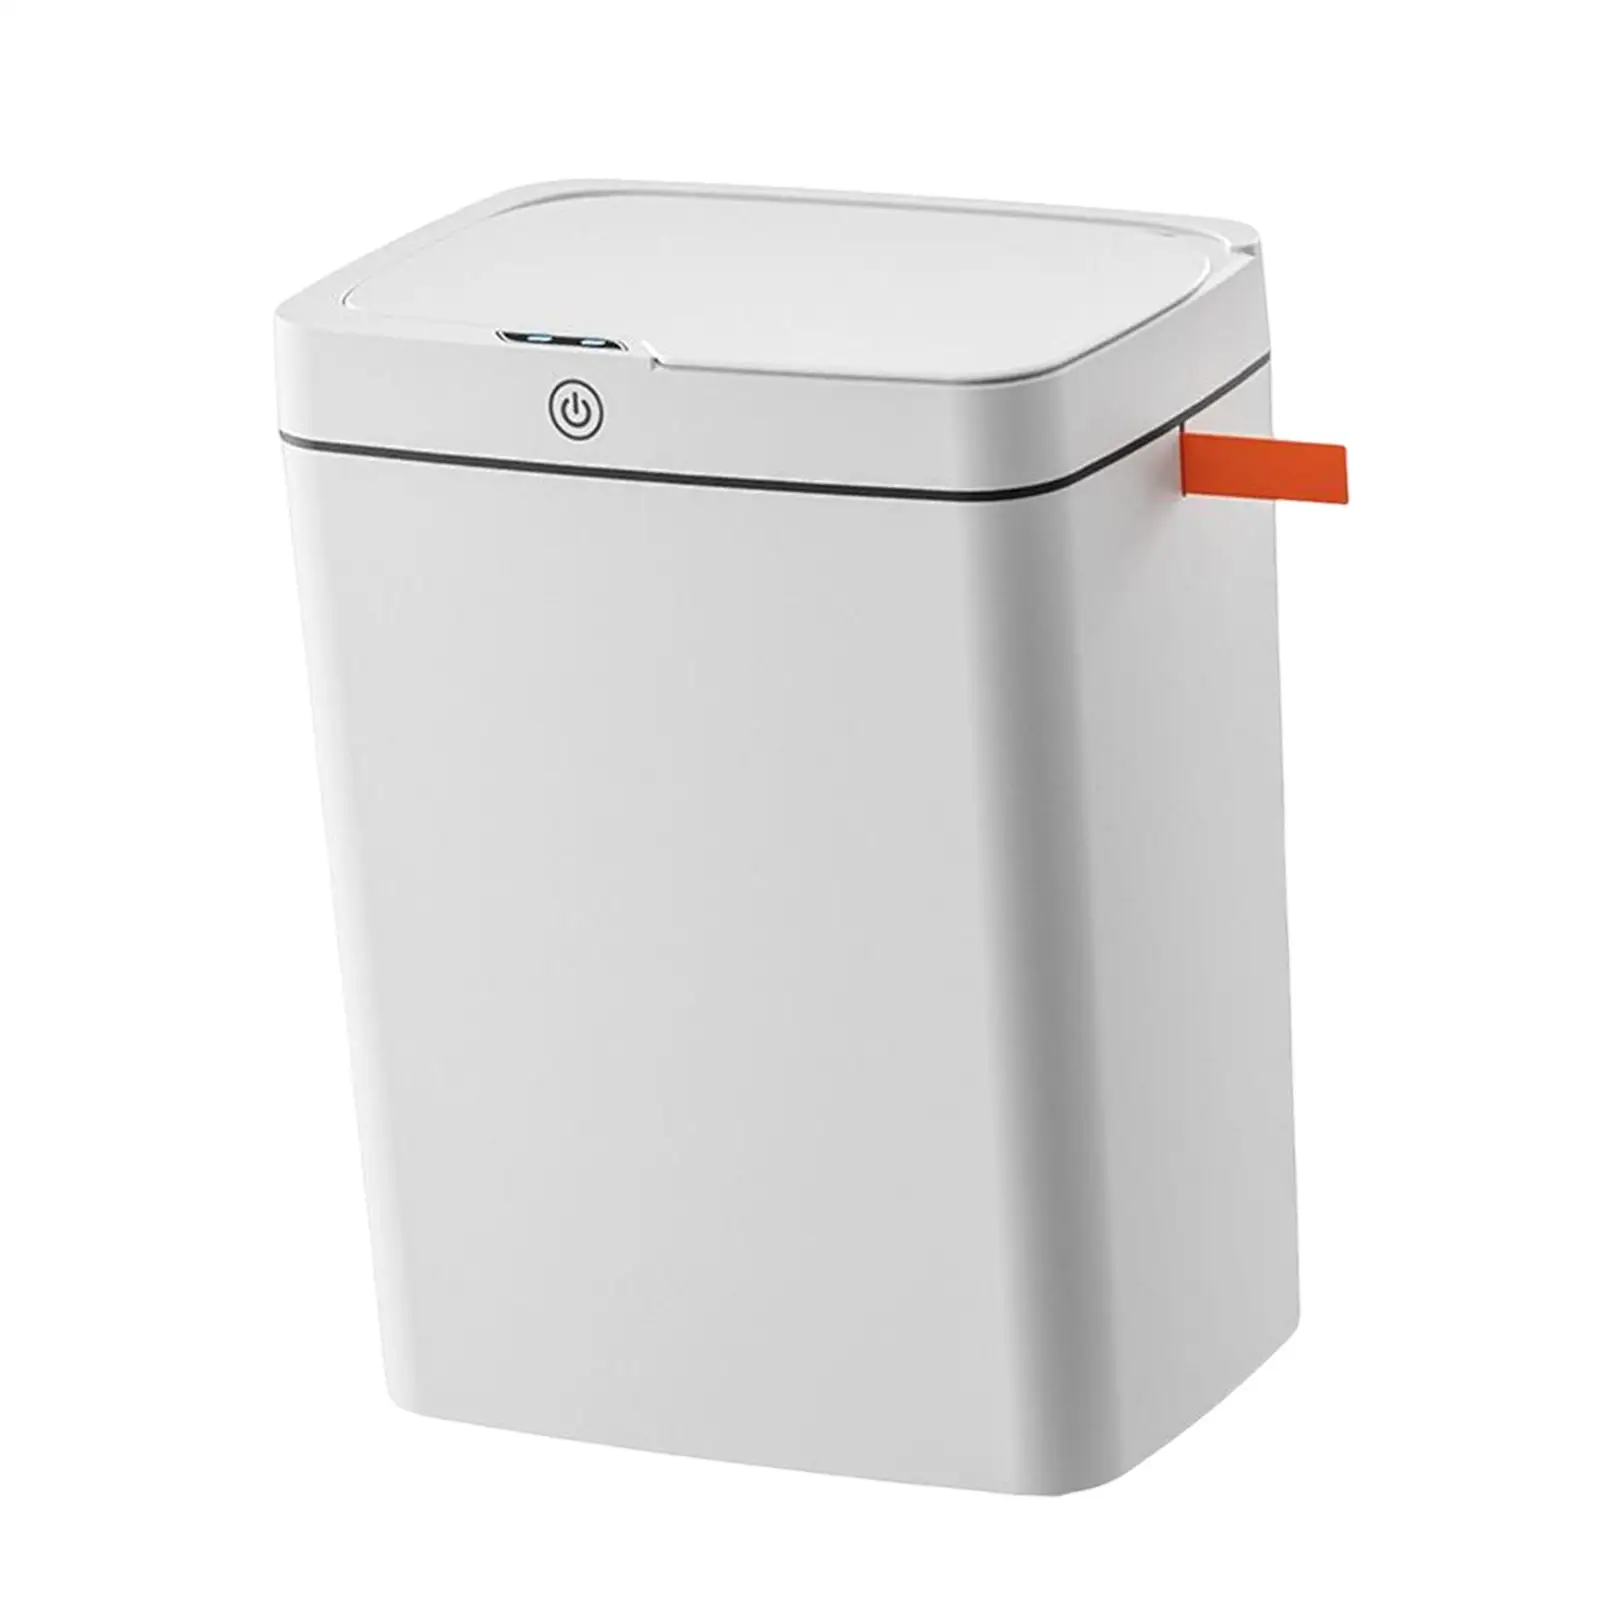 Slim Narrow Bedroom Garbage Bin Motion Sensor Smart Trash Can Automatic Garbage Can for Living Room RV Kitchen Commercial Use